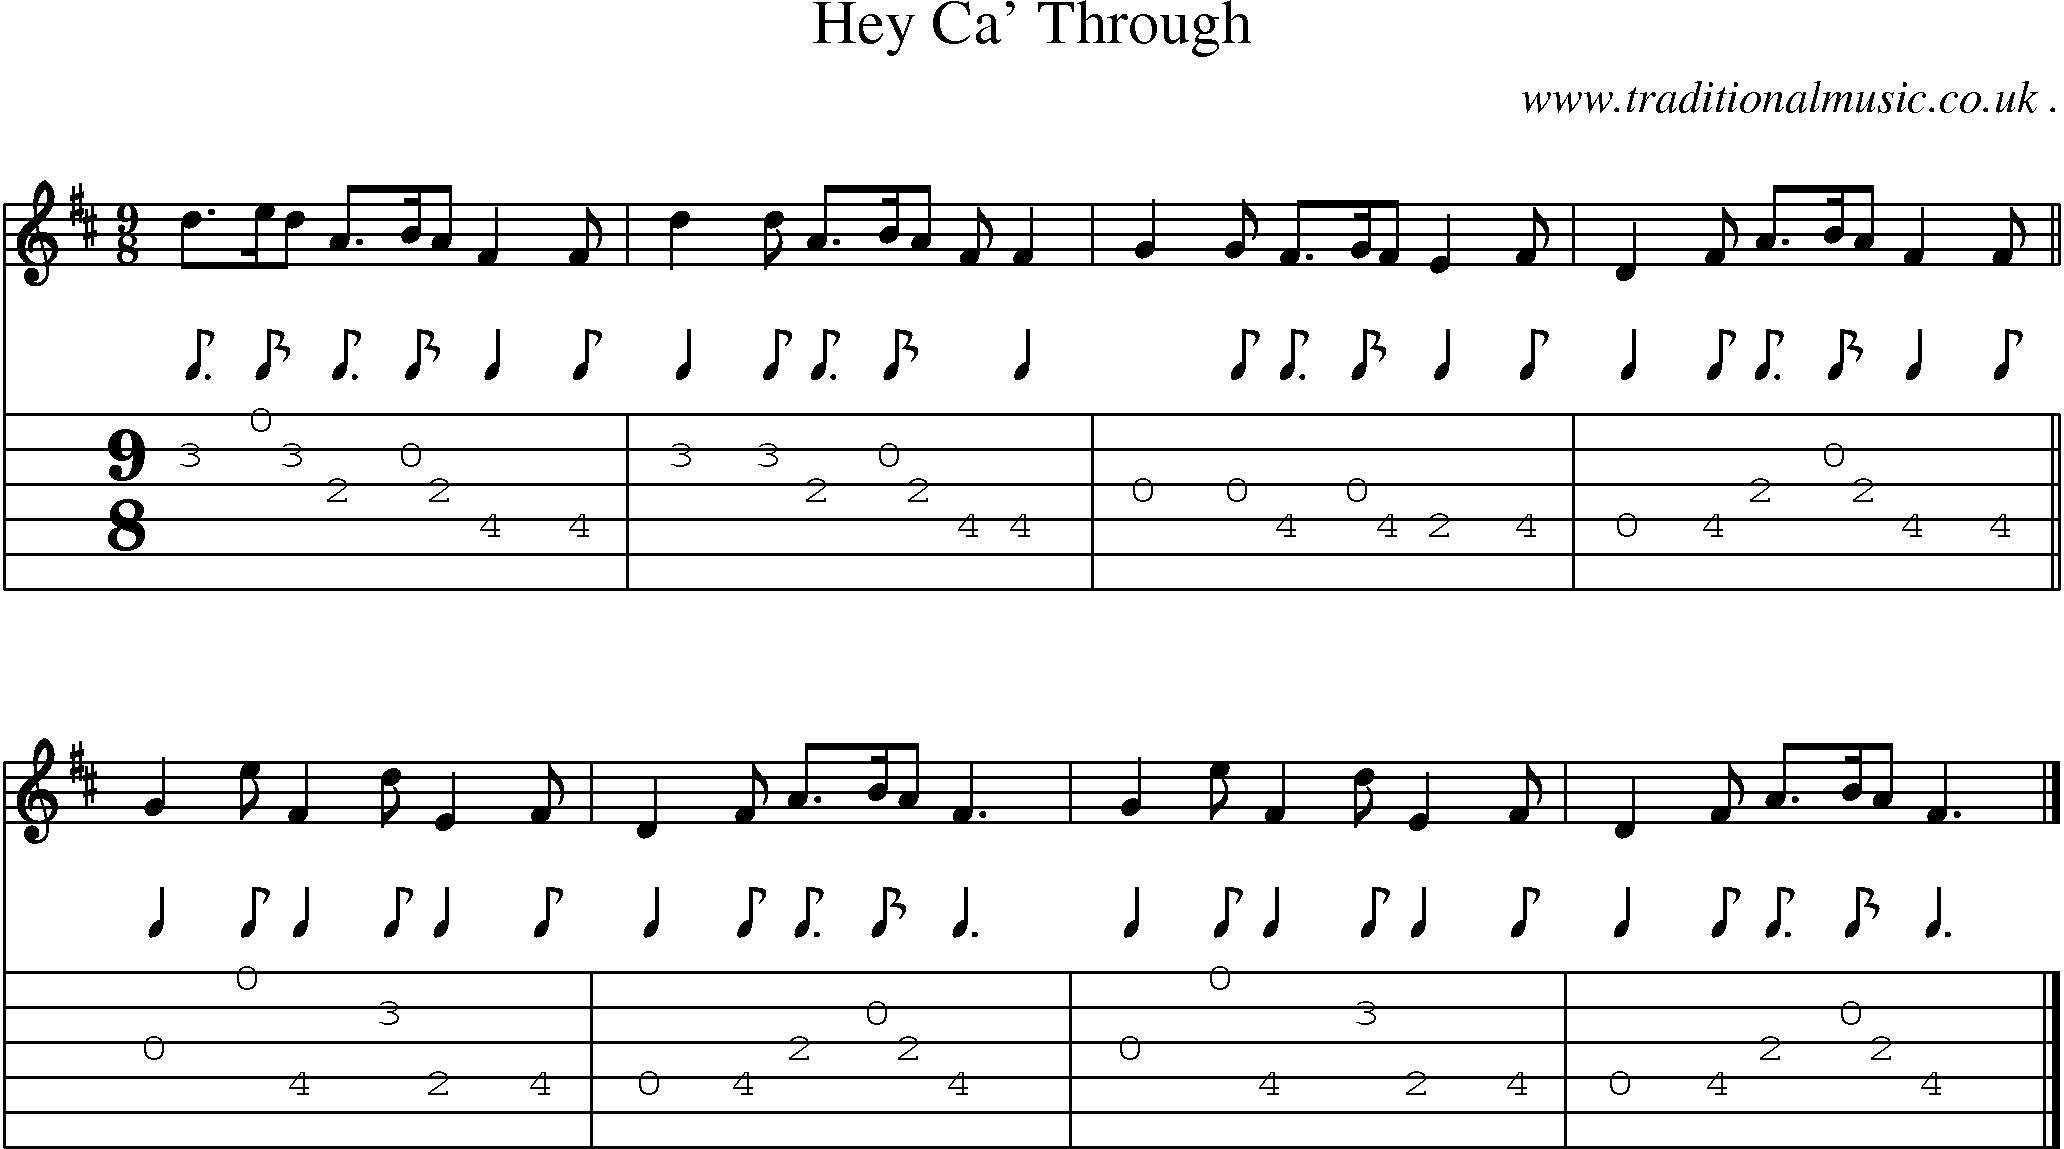 Sheet-music  score, Chords and Guitar Tabs for Hey Ca Through